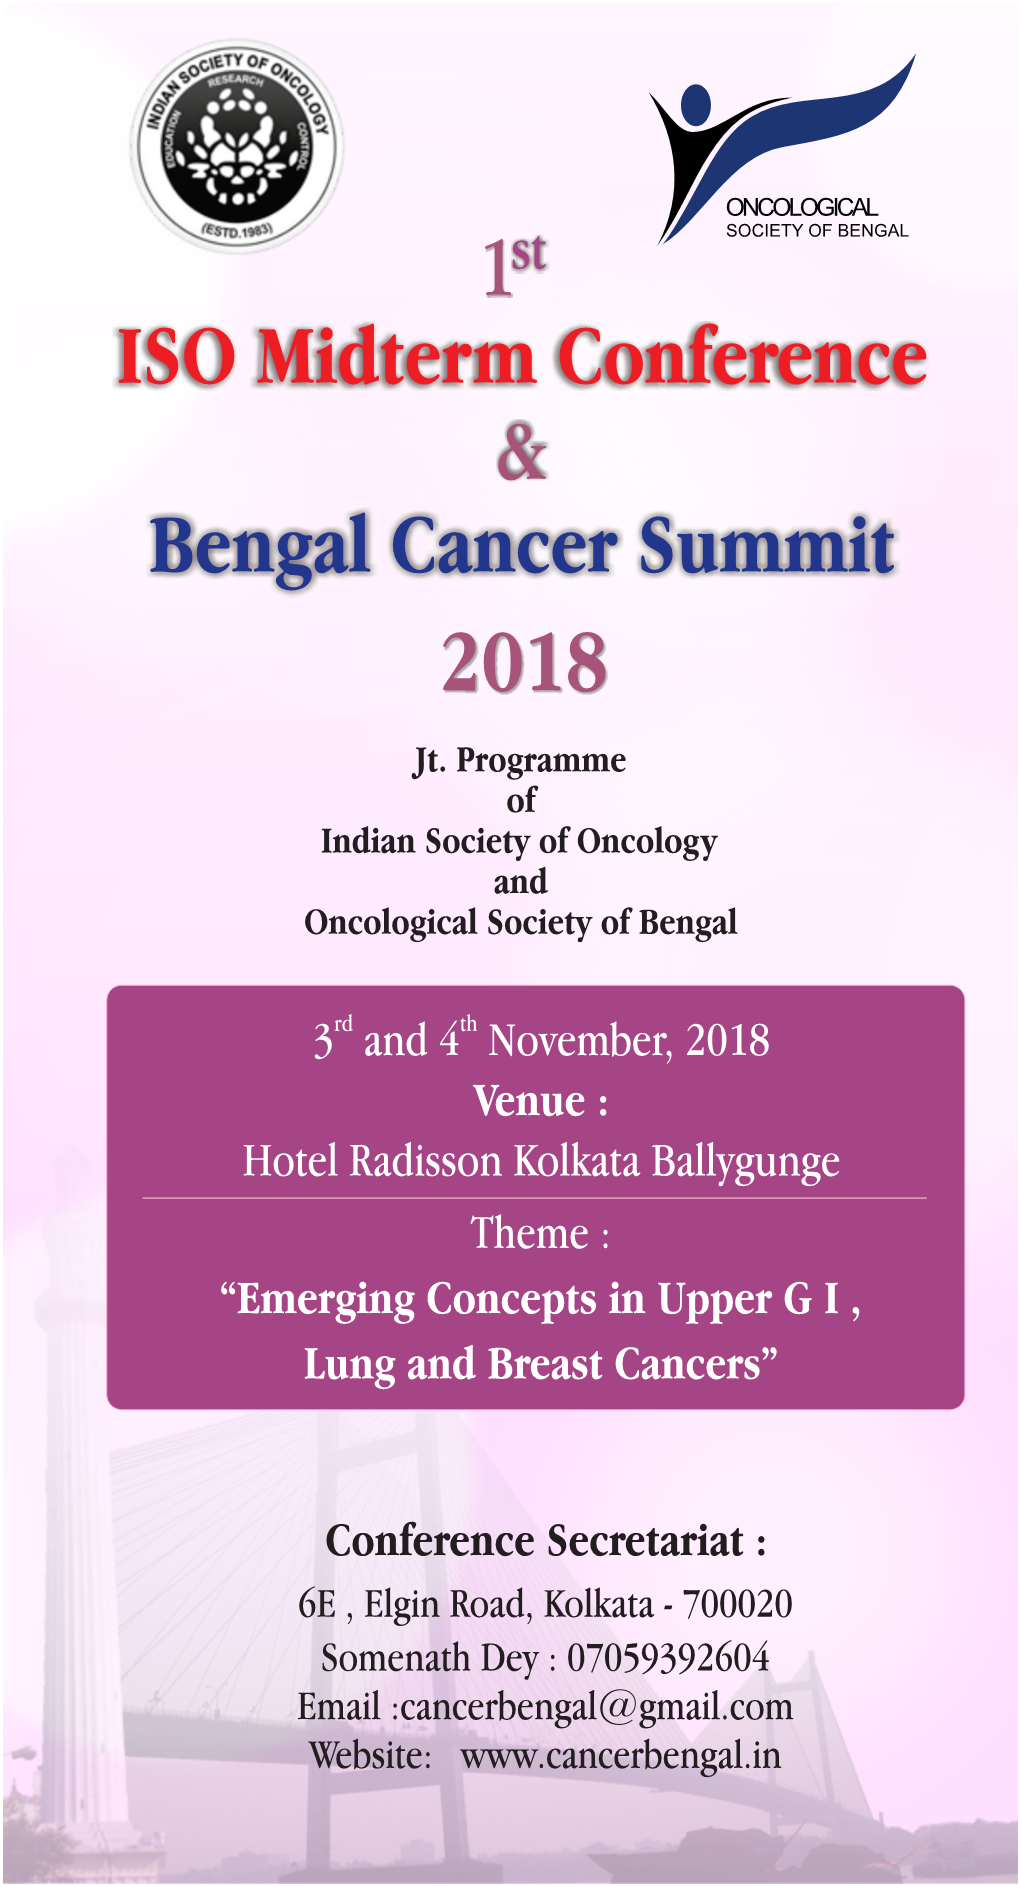 ISO Midterm Conference Bengal Cancer Summit &